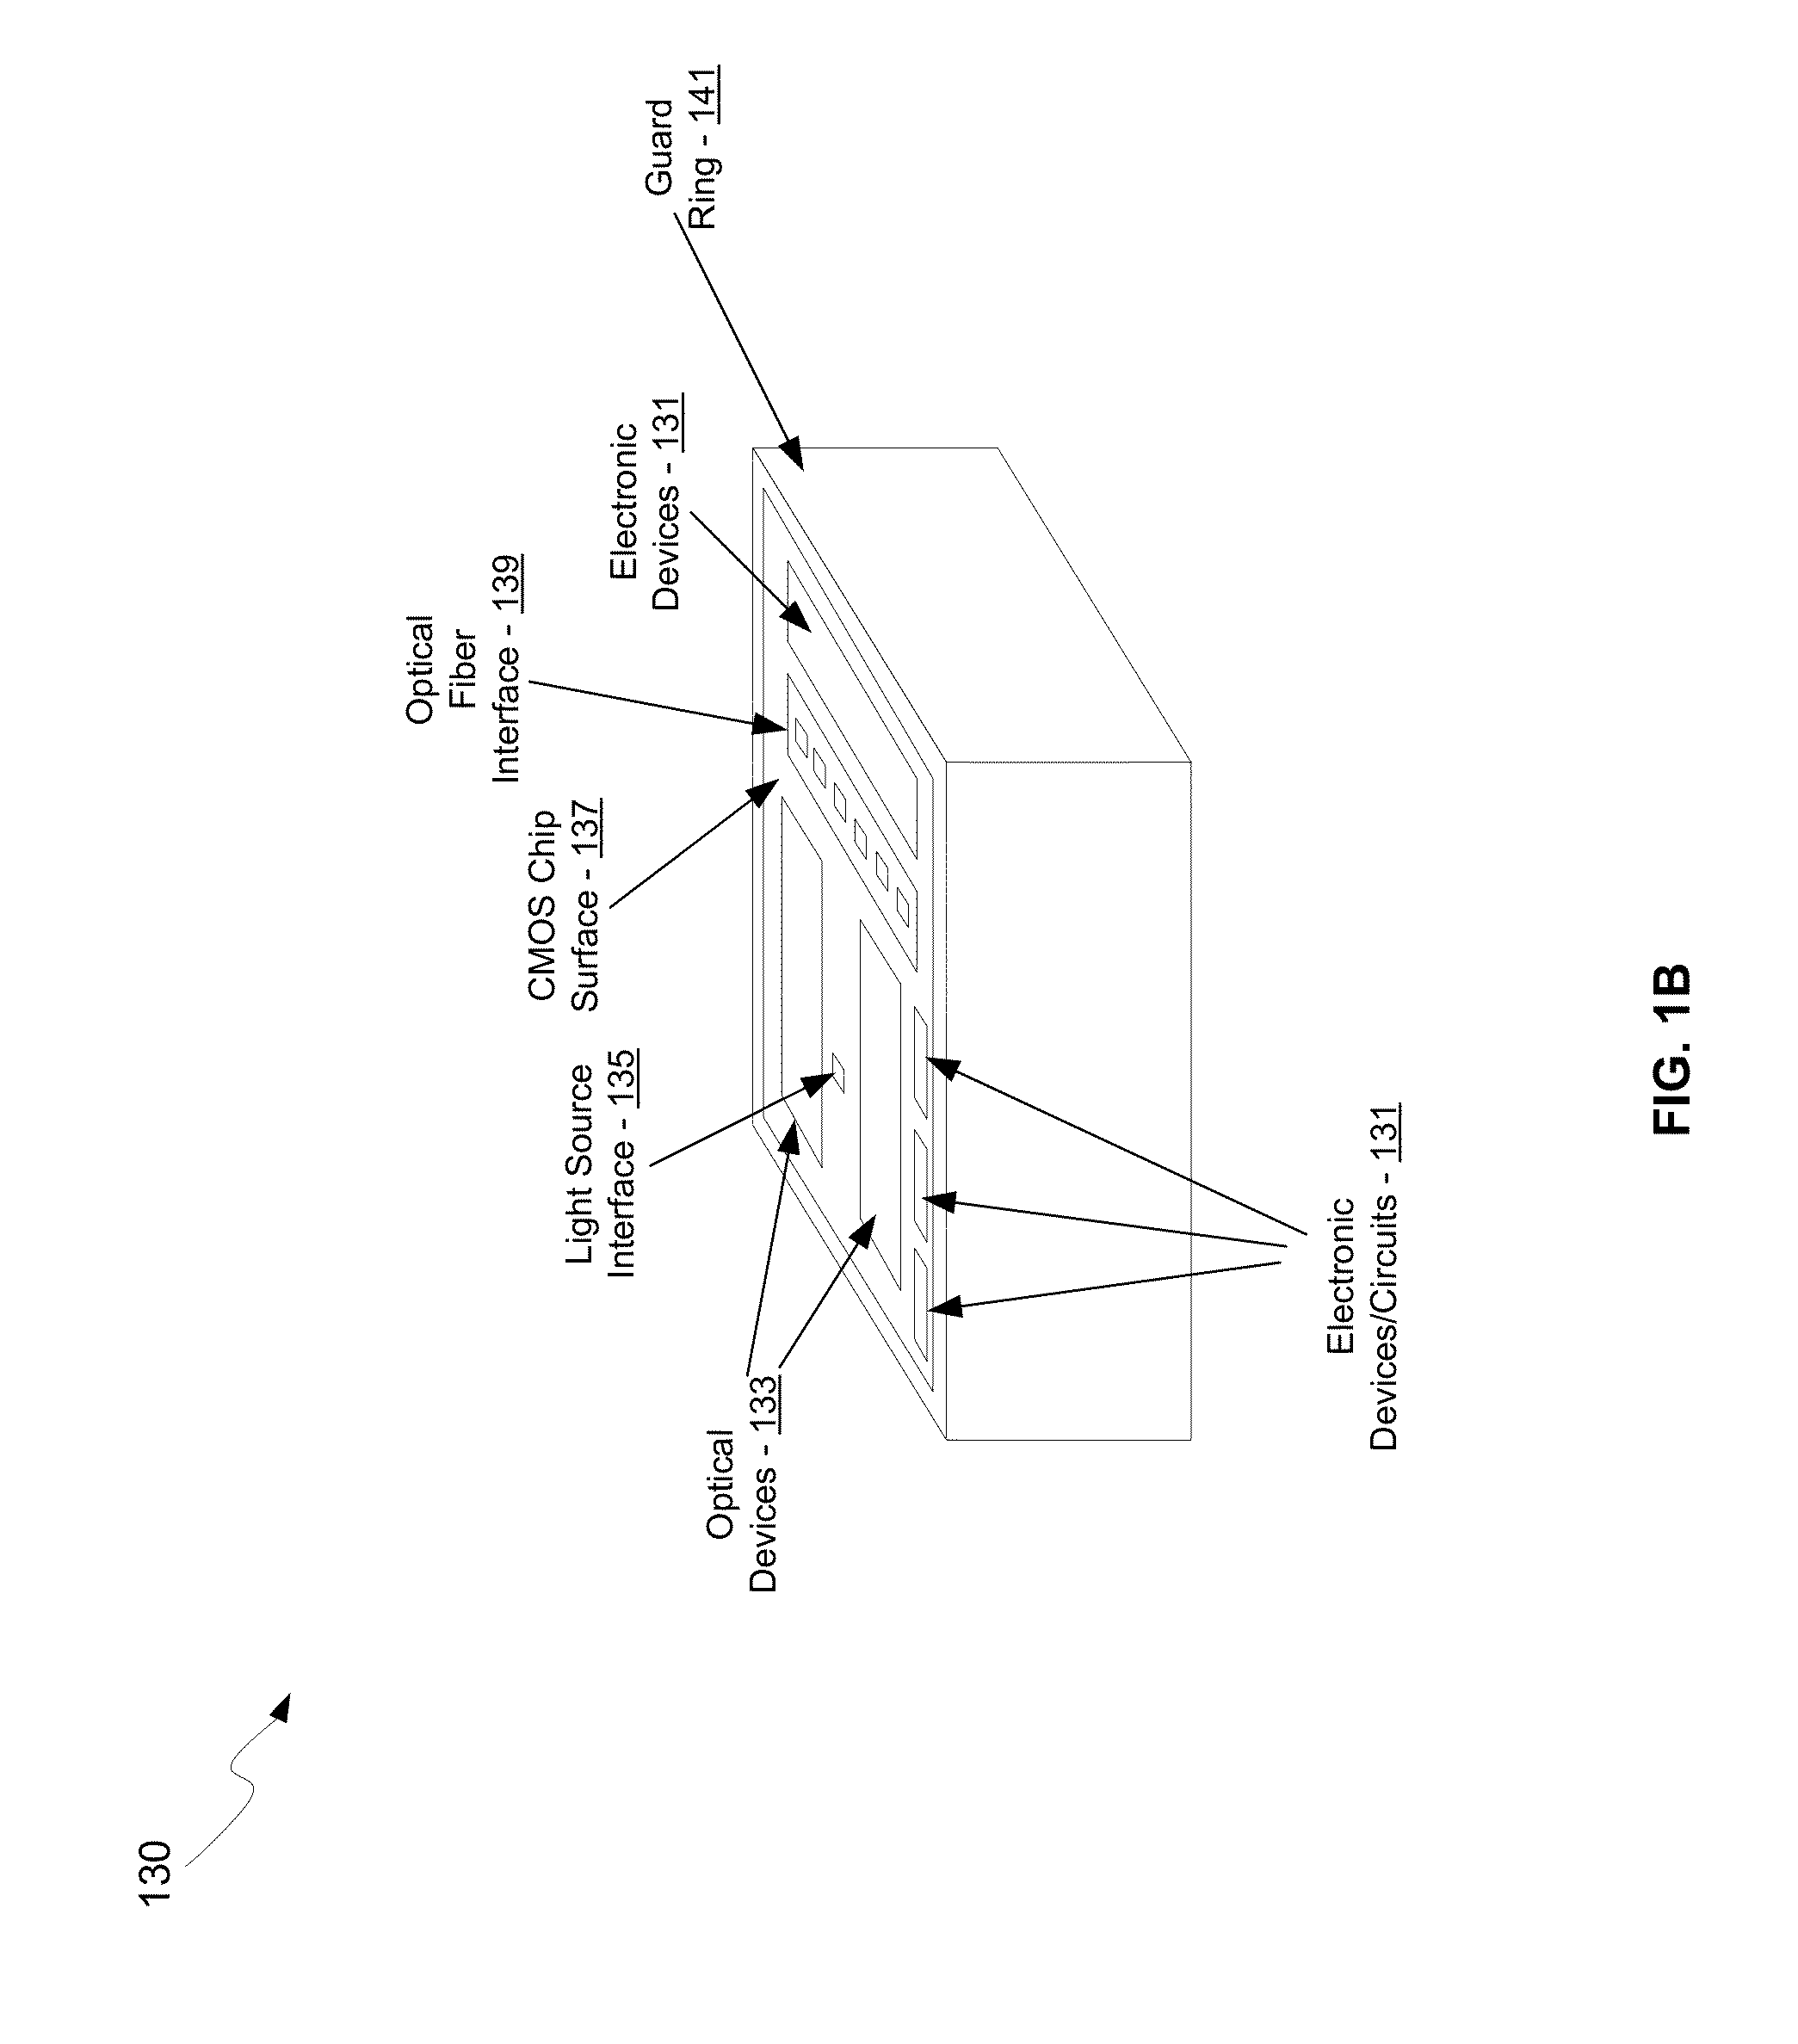 Method and system for grating couplers incorporating perturbed waveguides